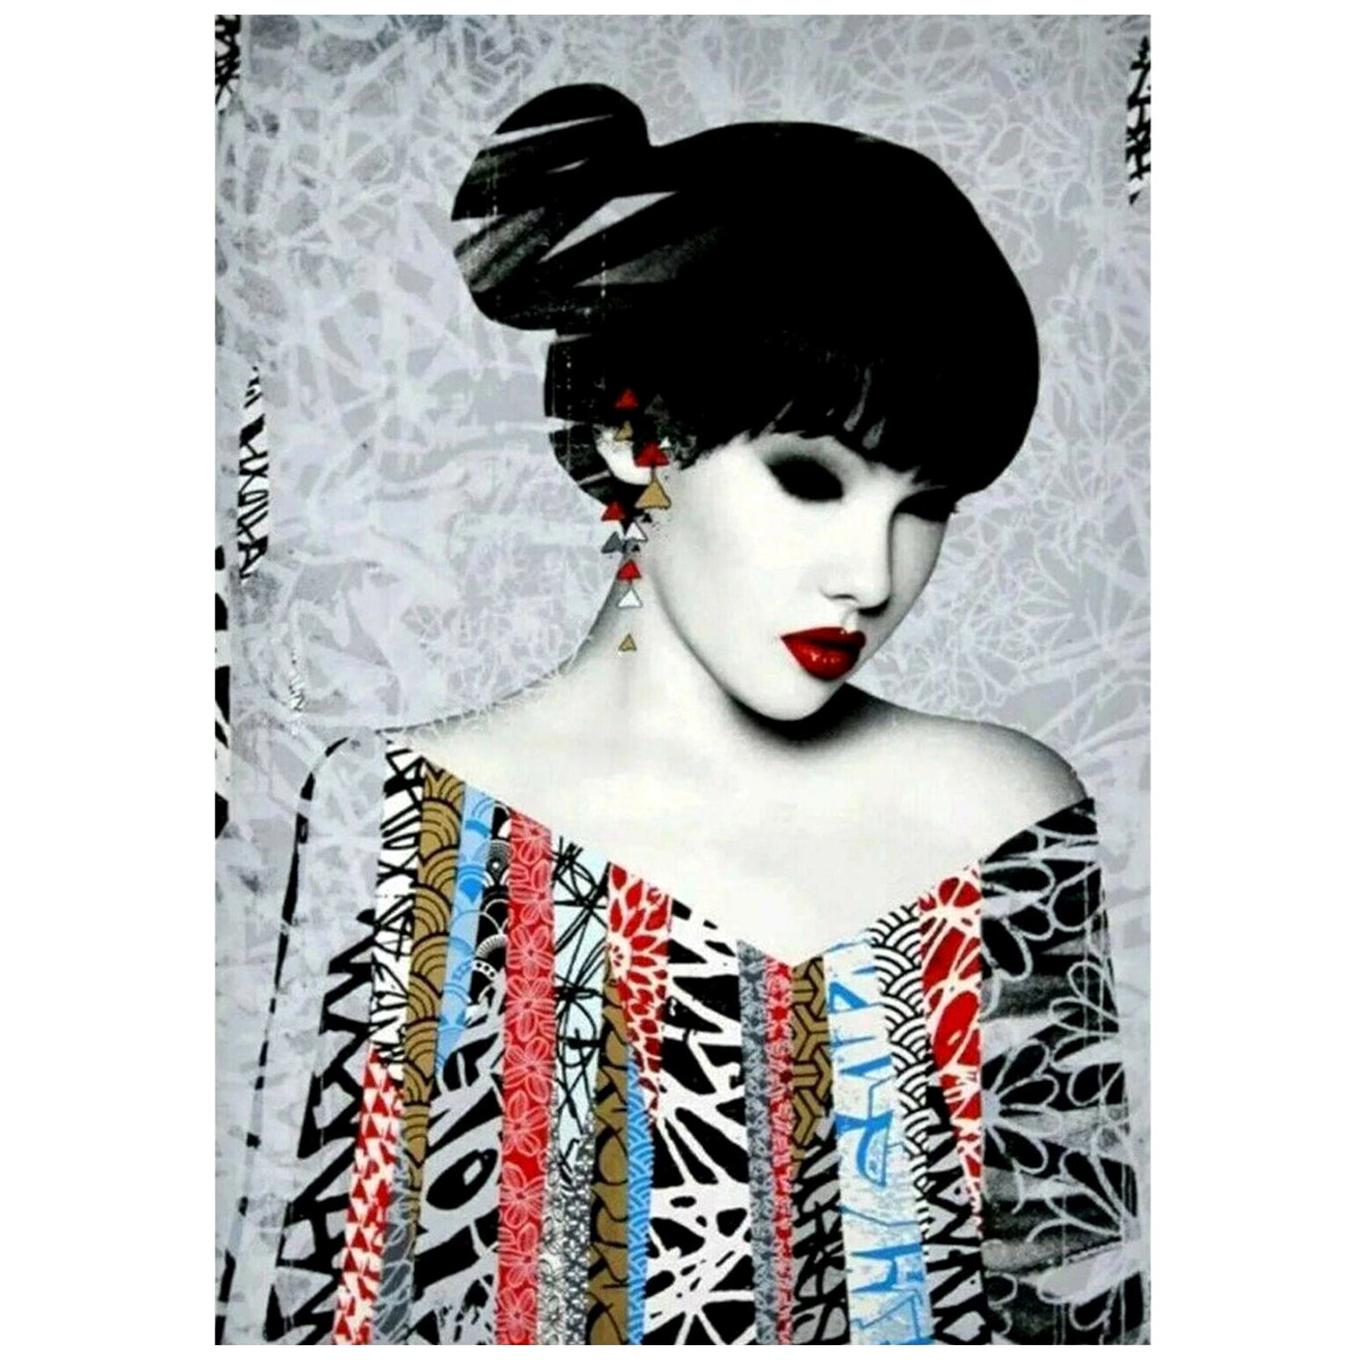 Hush, Poise, Limited Edition Screen Print